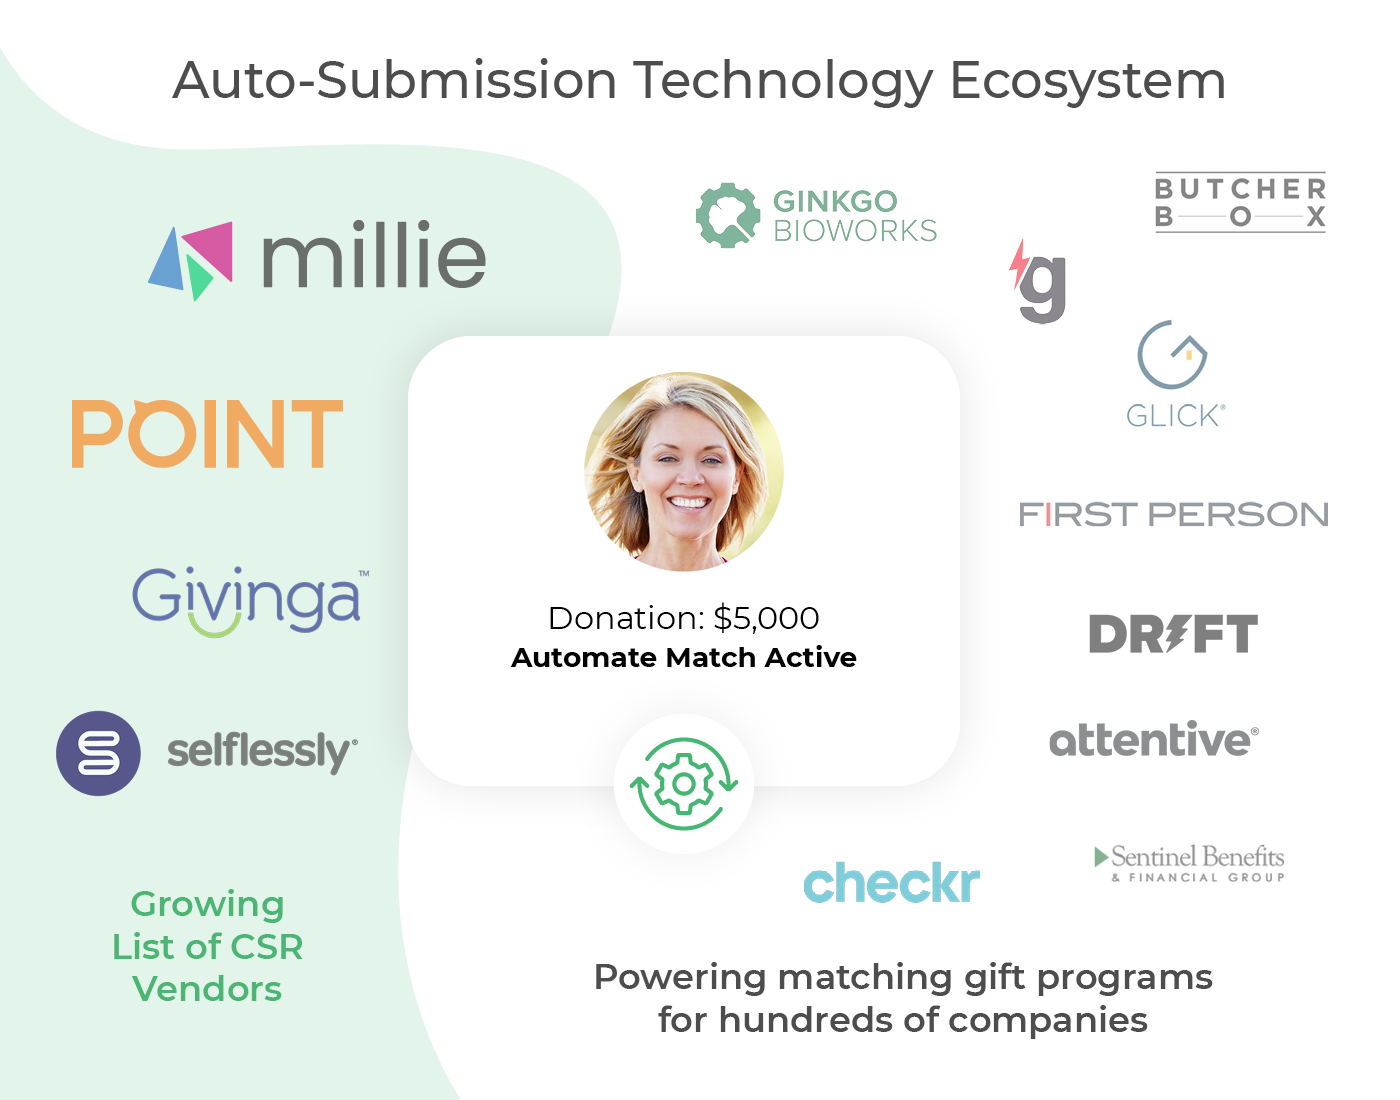 Matching gift auto-submission ecosystem